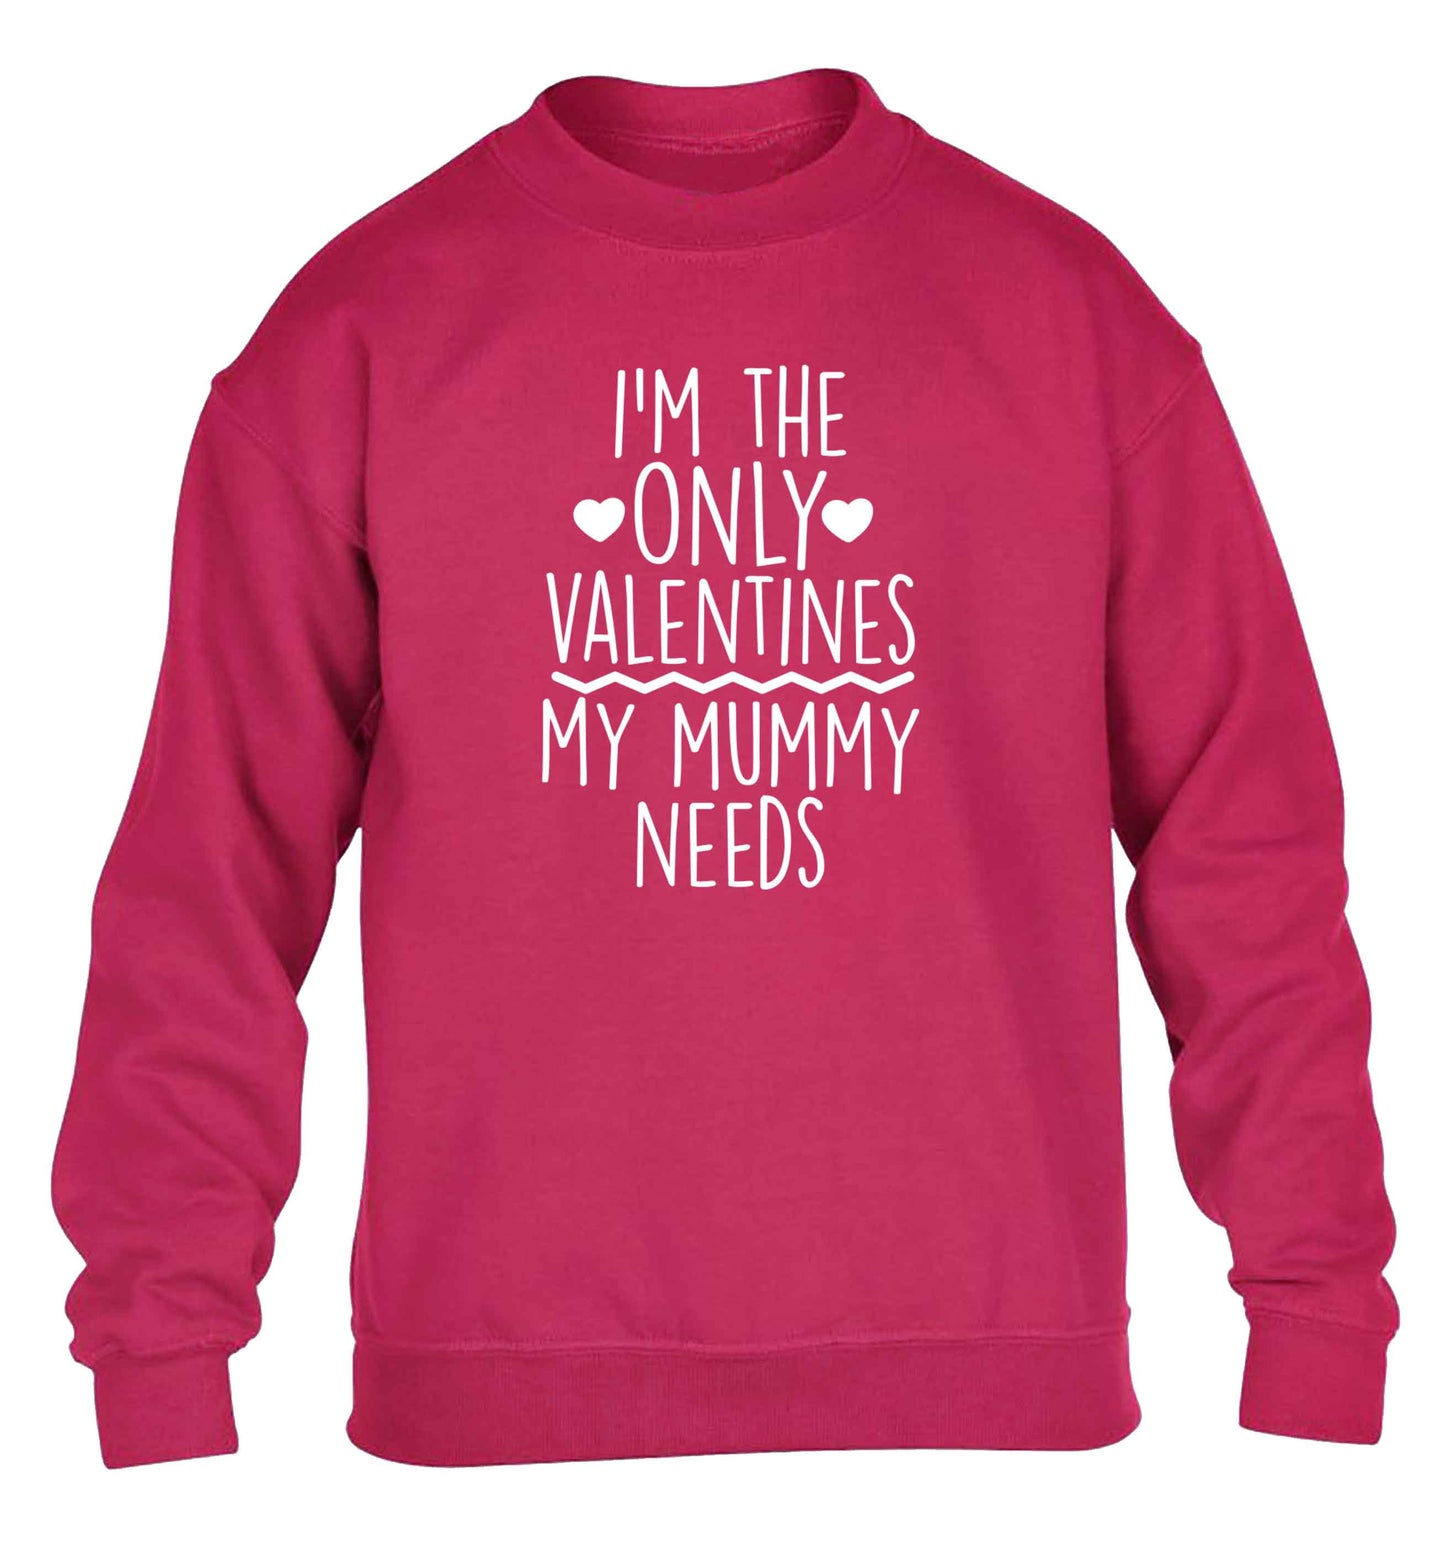 I'm the only valentines my mummy needs children's pink sweater 12-13 Years